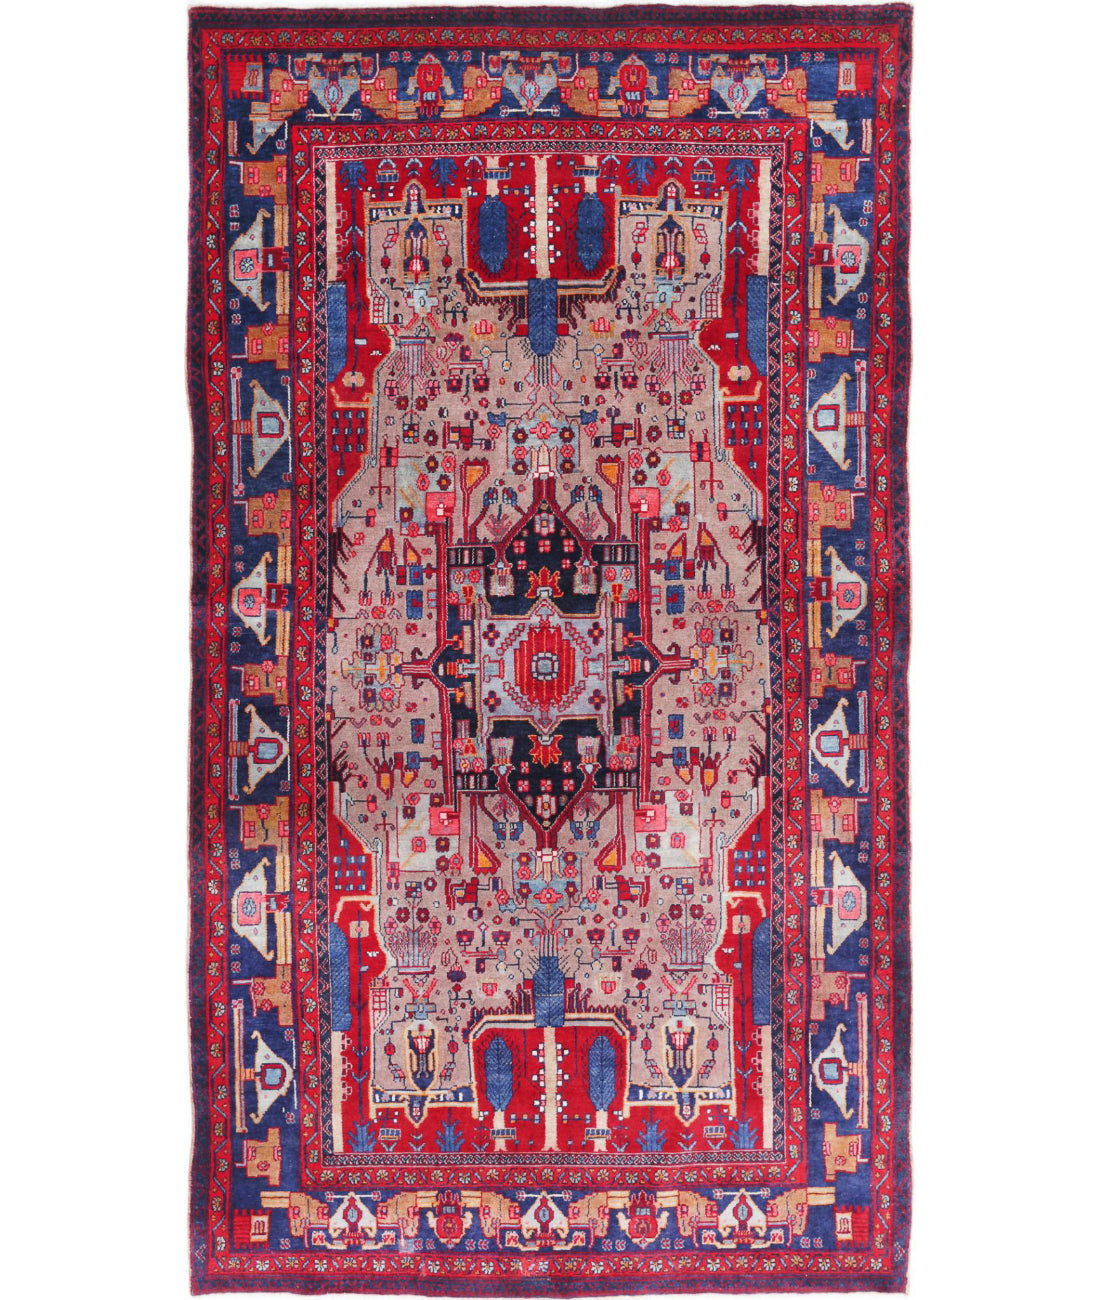 Hand Knotted Persian Hamadan Wool Rug - 4'11'' x 9'0'' 4'11'' x 9'0'' (148 X 270) / Red / Blue